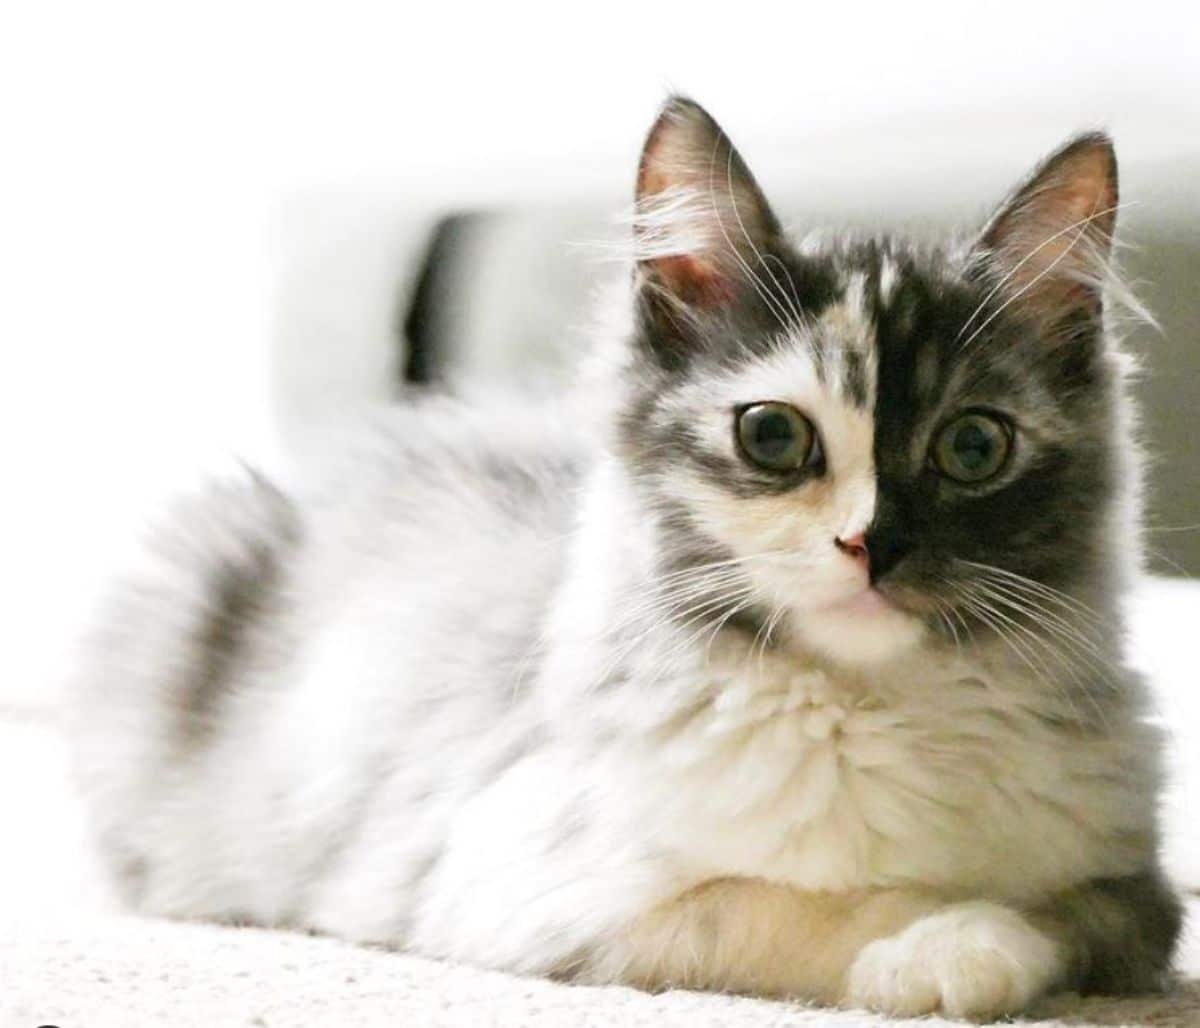 fluffy kitten with right side of face being grey and left side being black laying on white carpet